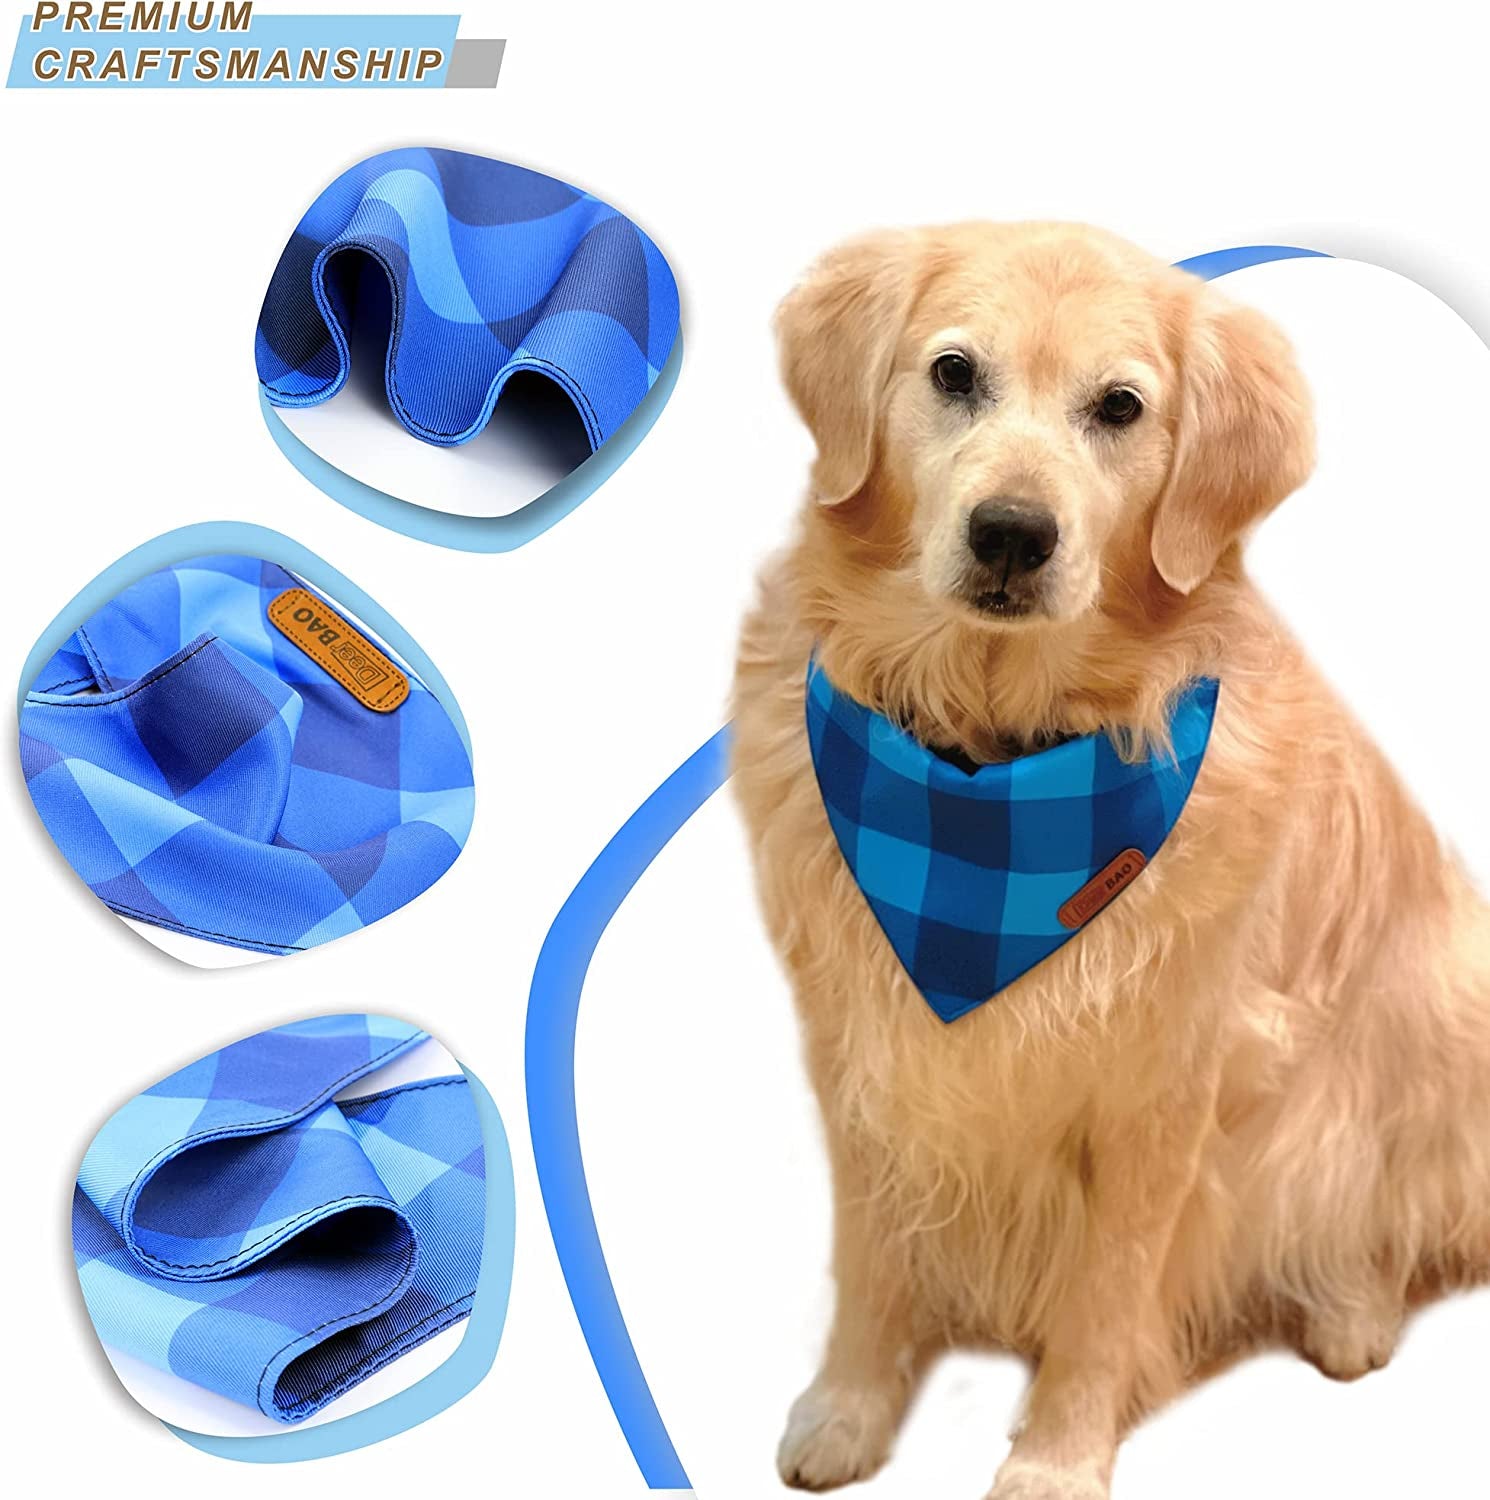 Deerbao Dog Bandanas 4Pack,Dog Scarf,Dog Bandanas Boygirl,Premium Durable Fabric,Adjustable Fit,Unique Shape,Suitable for All Kinds of Dogs,Provide Various Sizes (Large, Classic Plaid) Animals & Pet Supplies > Pet Supplies > Dog Supplies > Dog Apparel DeerBAO   